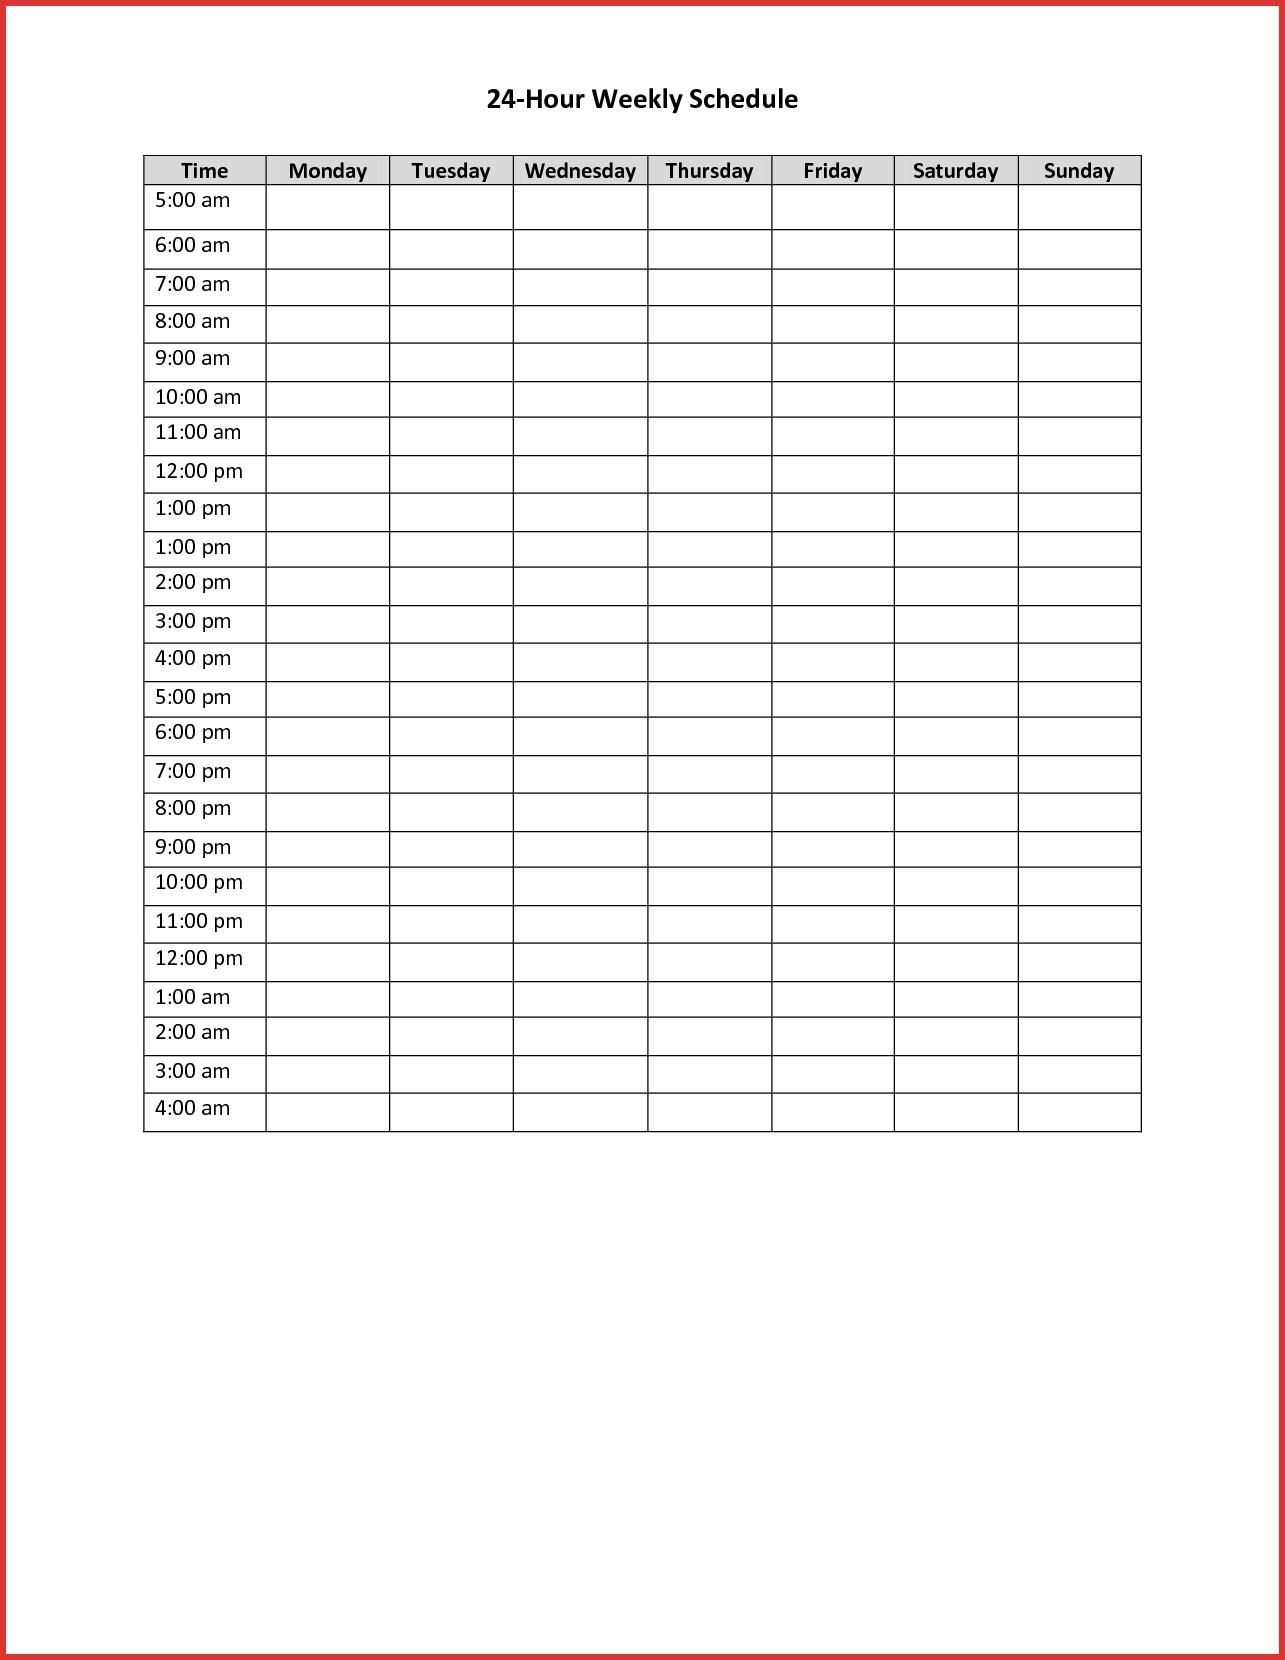 Hour Weekly Calendar Template Hola Klonec Co Schedule With Hours with regard to Weekly Calendar By Hour Printable